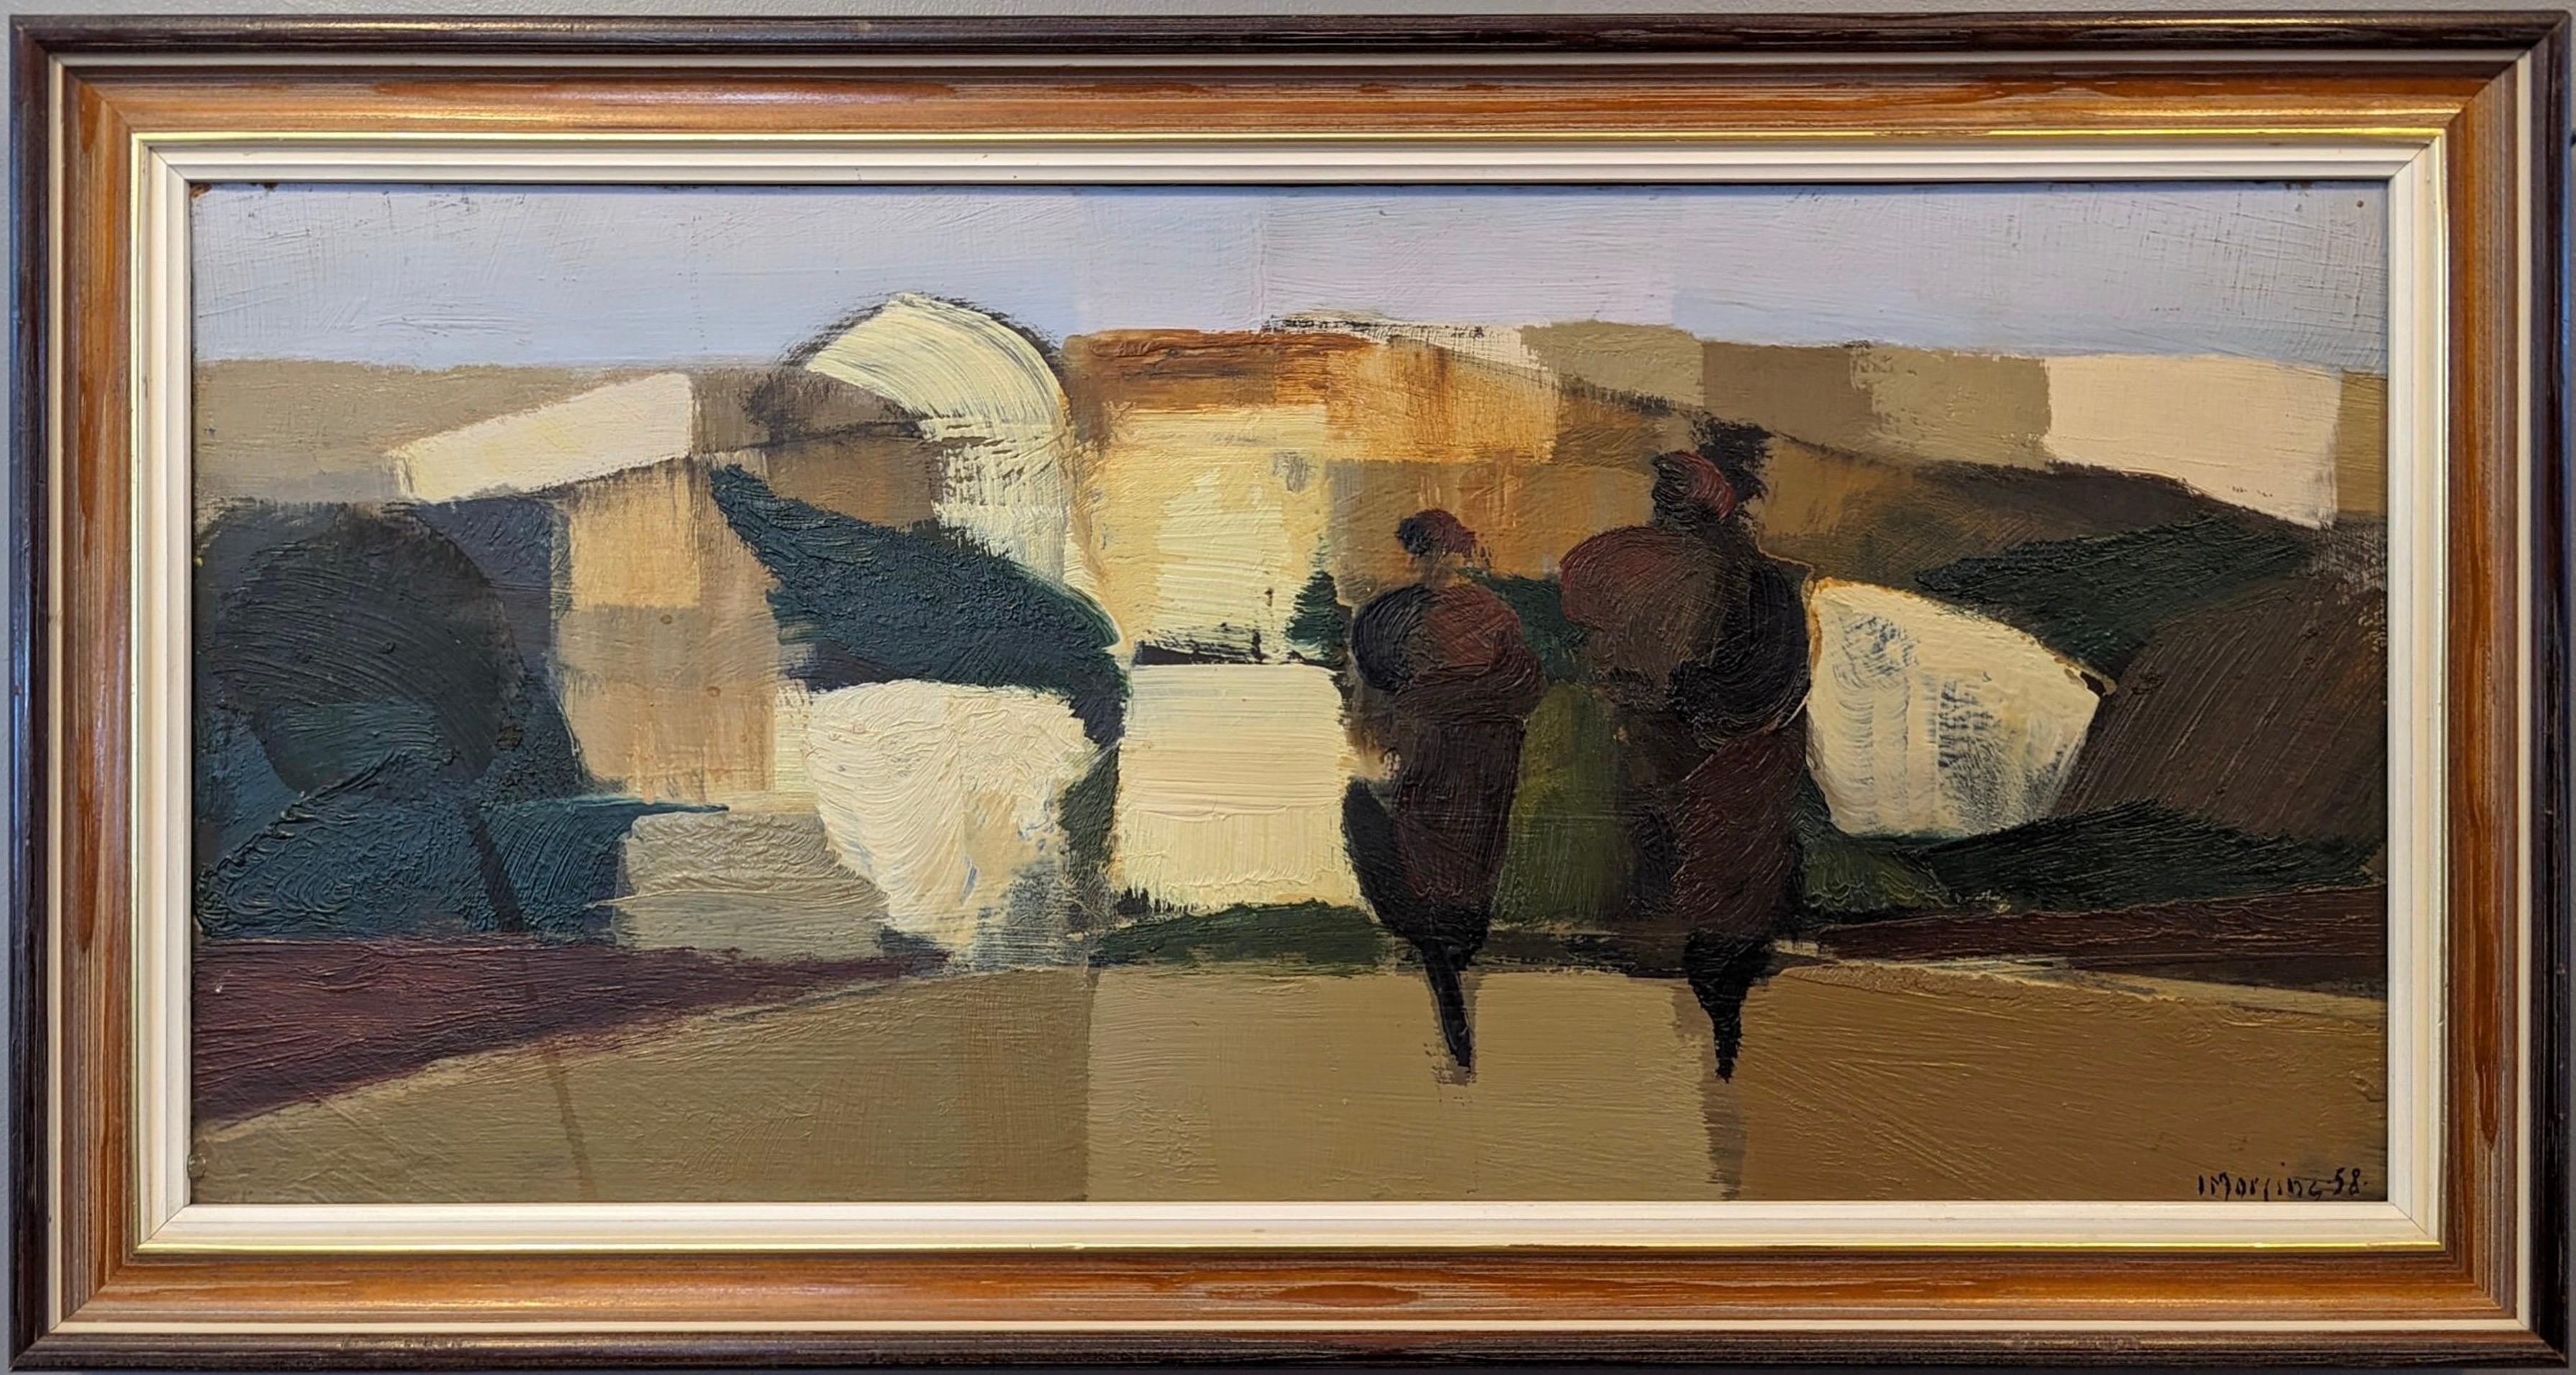 SPANISH AFTERNOON
Size: 26 x 49 cm (including frame)
Oil on Board

A brilliantly executed semi-abstract oil composition, painted in 1958 by the established Swedish artist Ivar Morsing (1919-2009), whose works have been exhibited in public